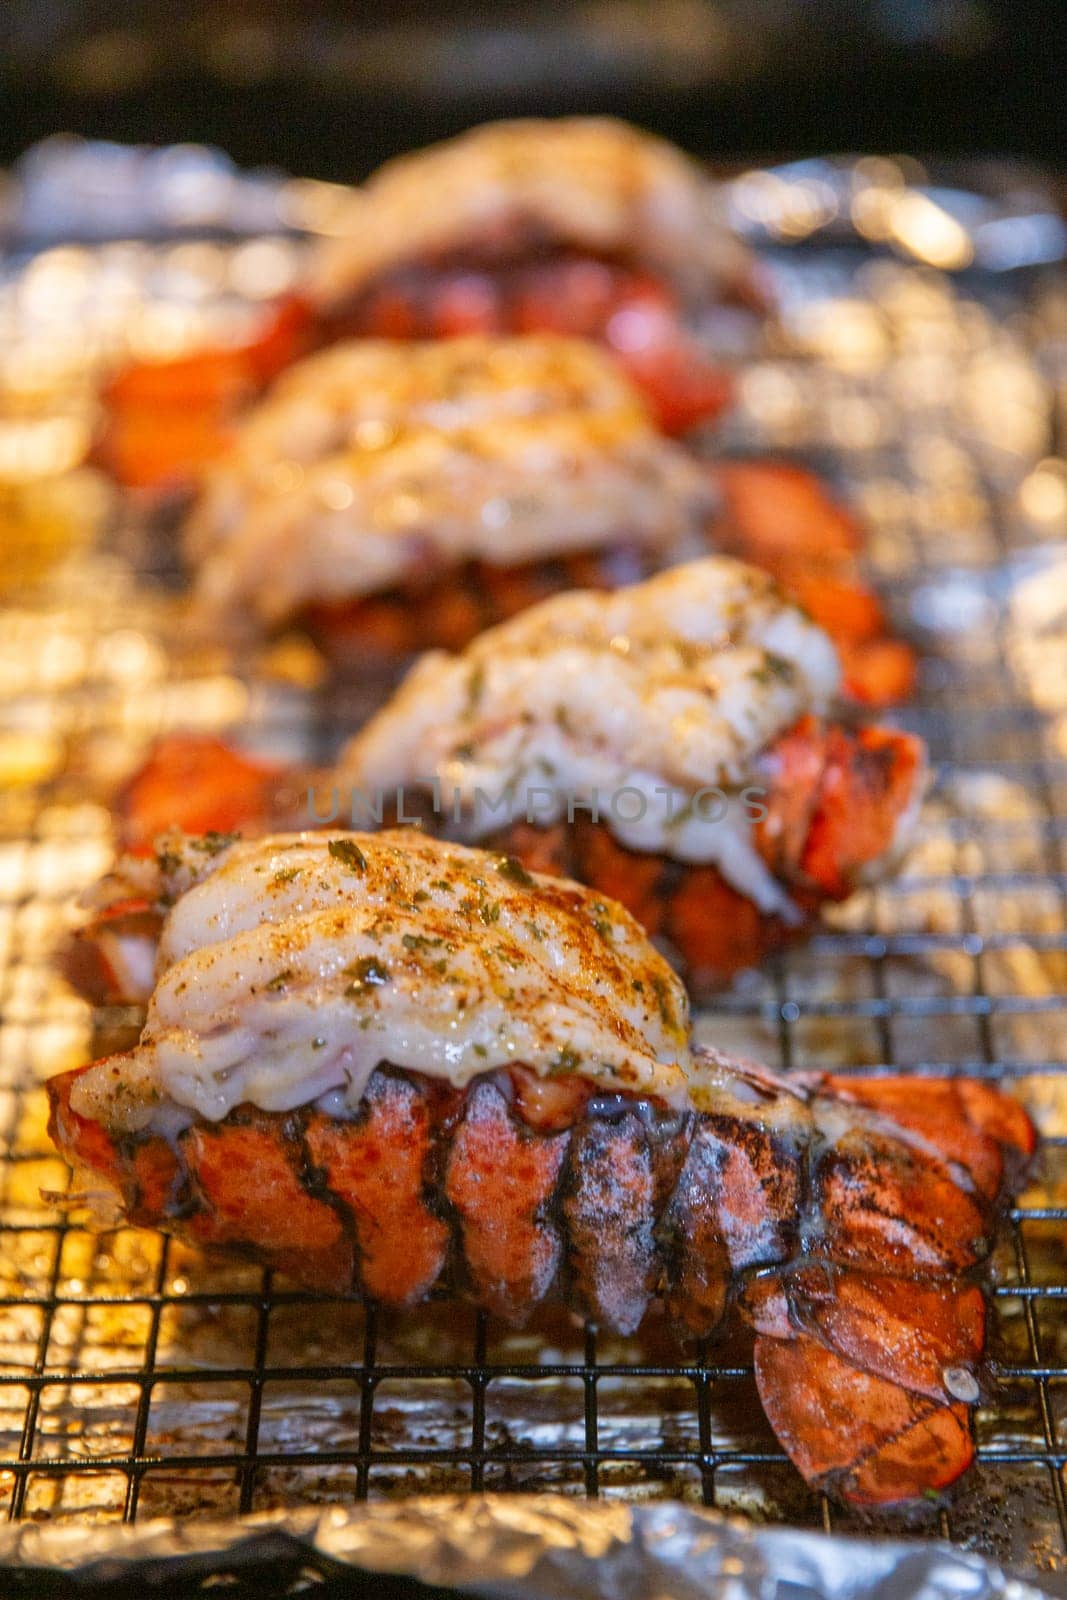 Four Broiled Lobster Tails by TopCreativePhotography